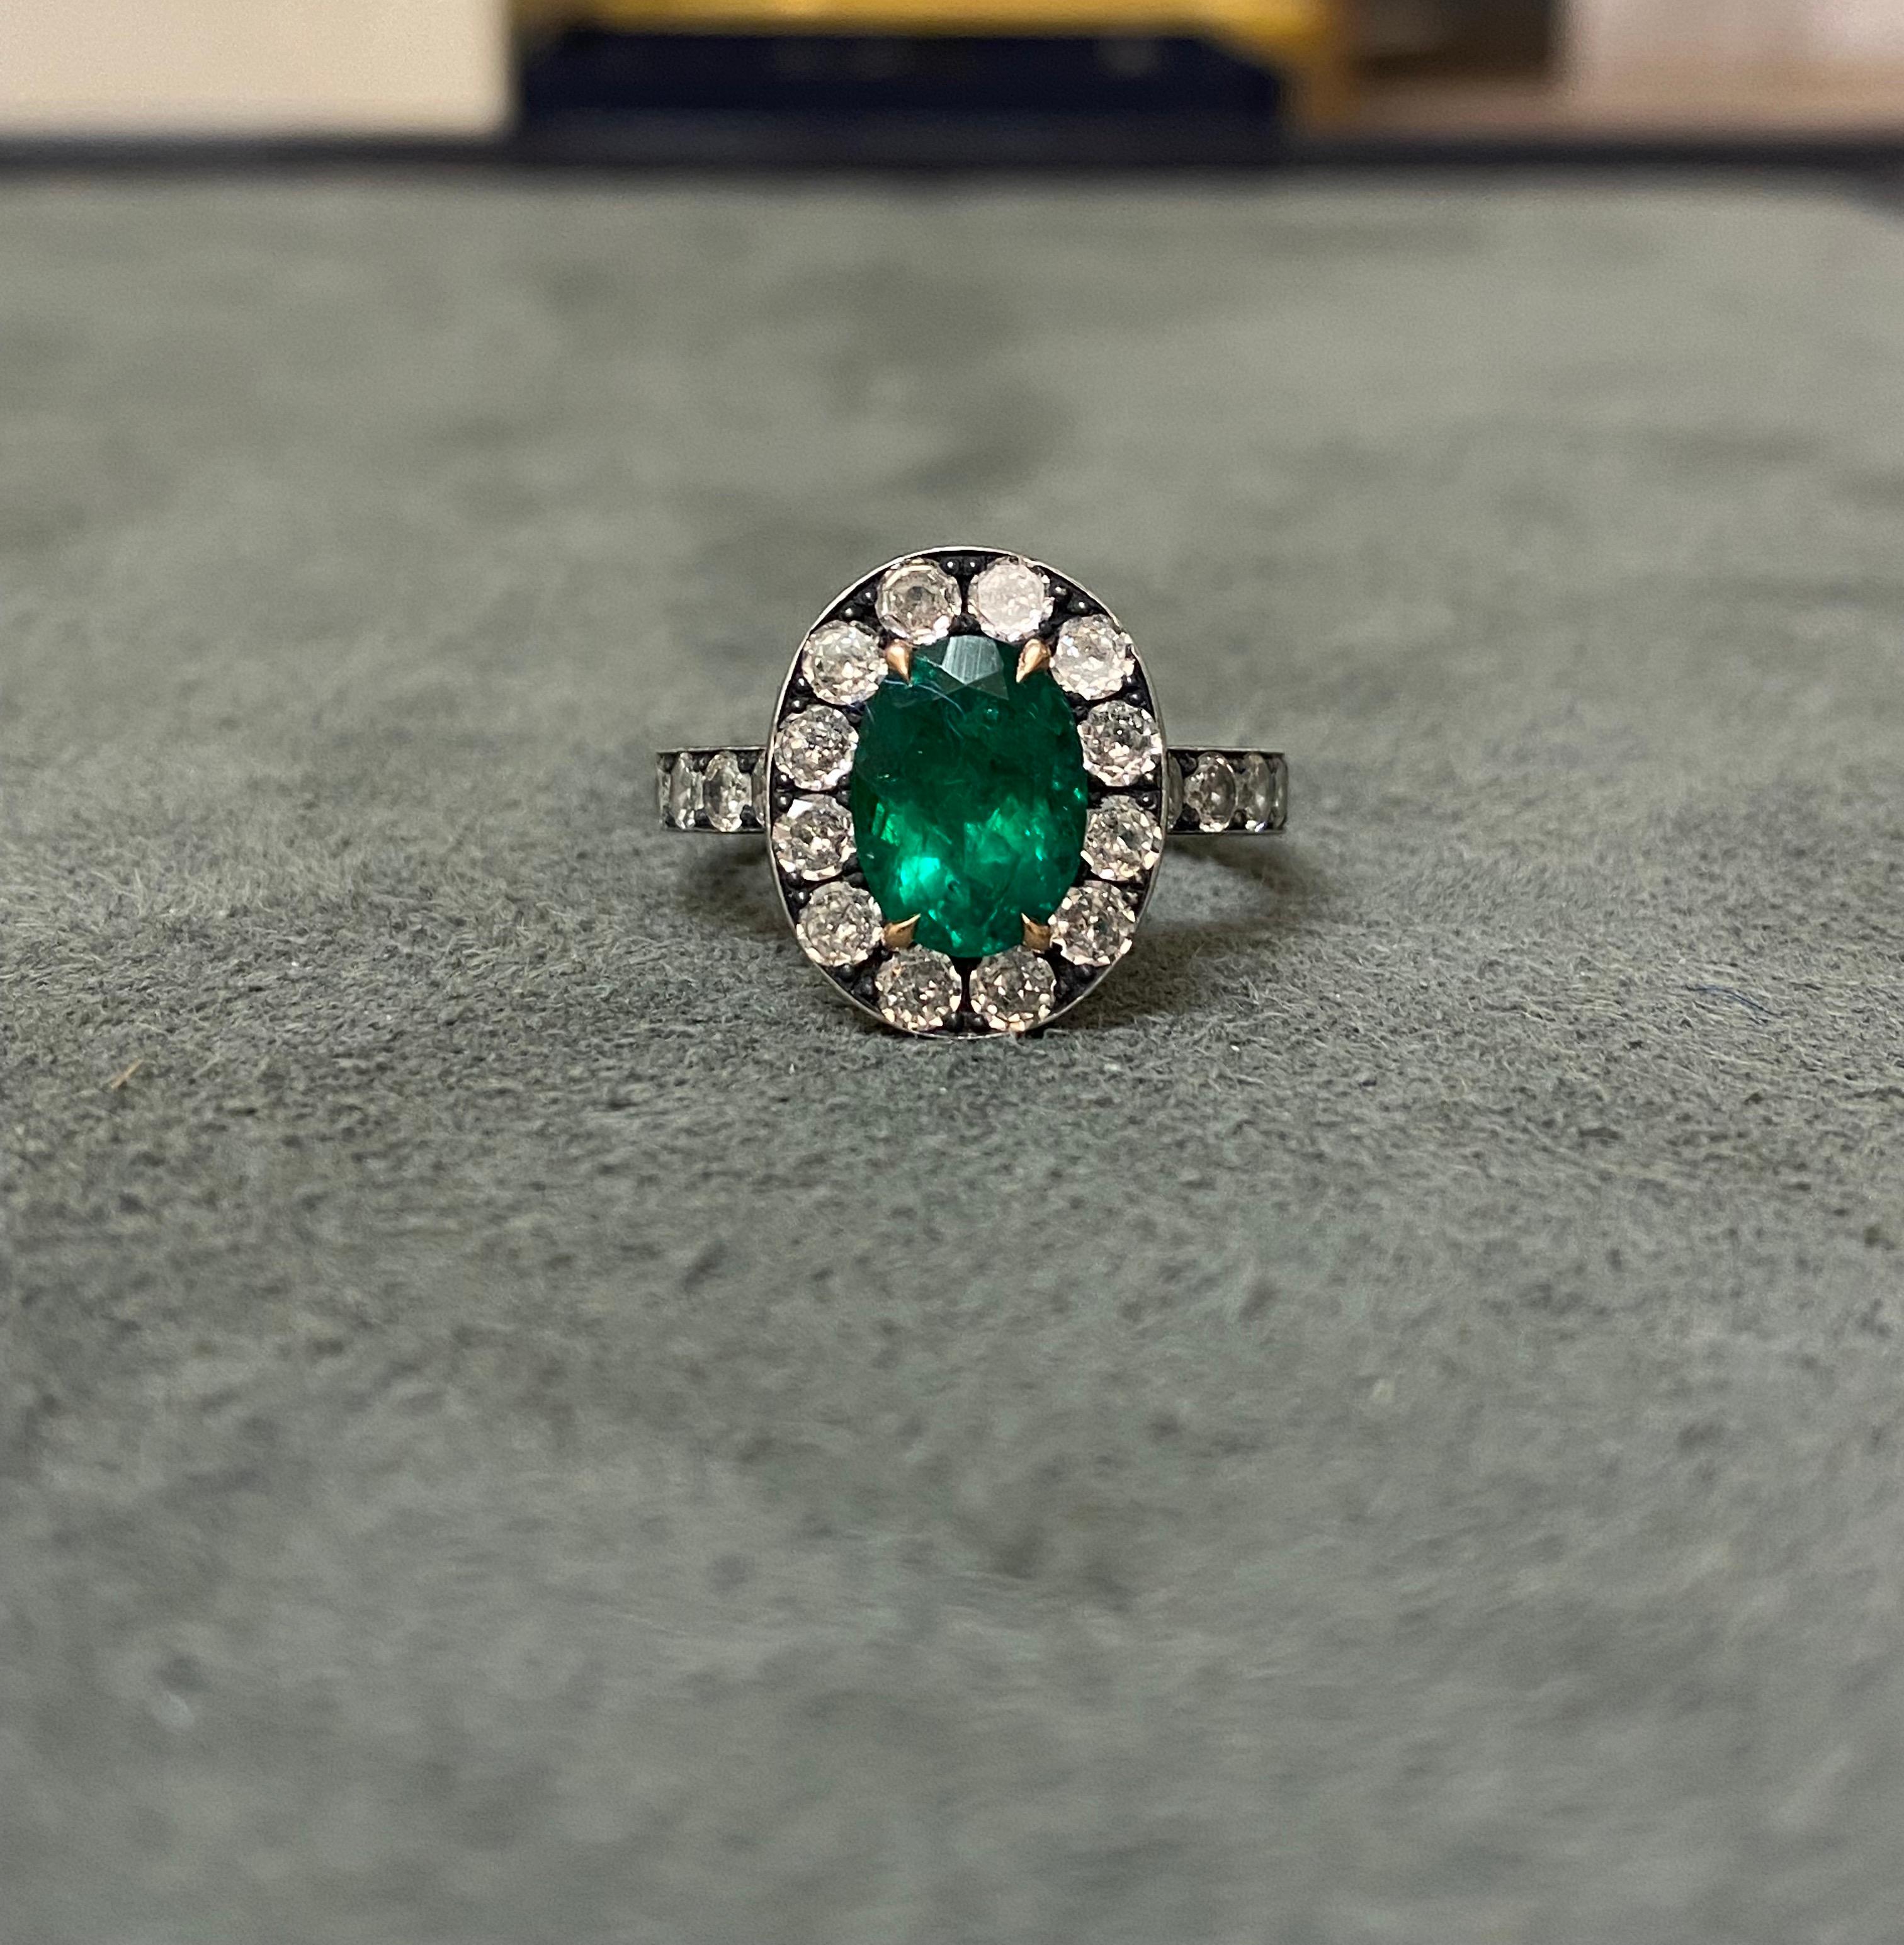 A Brazilian emerald set with diamonds in 18k rose gold and blackened silver. The emerald weighs 1.79ct, with minor oil treatment. The stone is certified by SSEF, and a copy of the certificate is available if interested. 33 diamonds (total weight